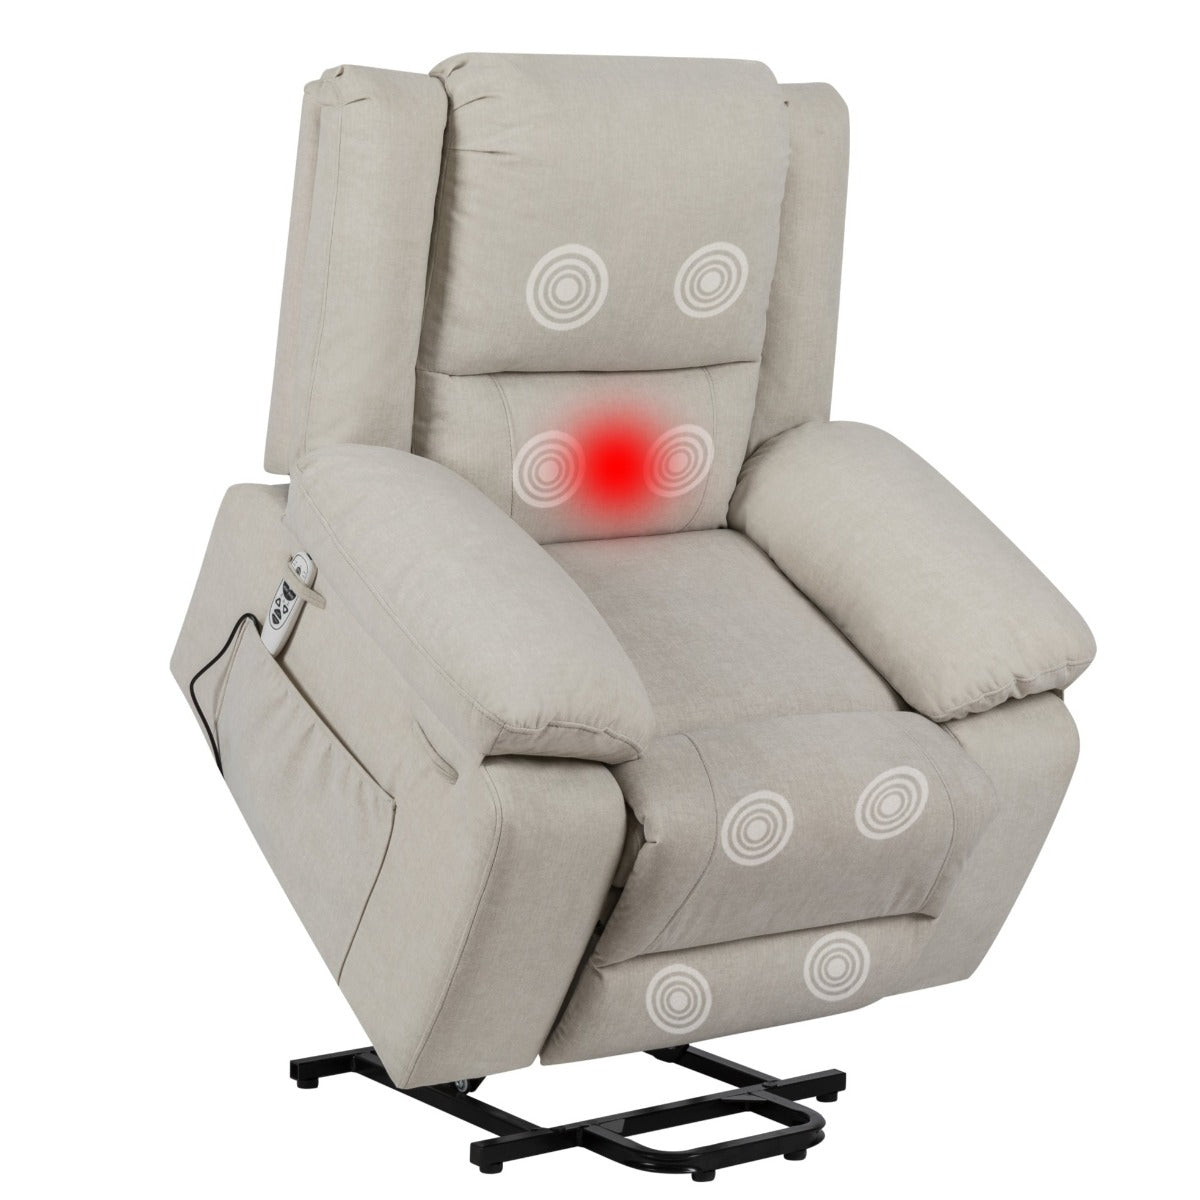 Power Recliner Chair With Massage and Cushion Heating, Beige, heat and massage points - My Lift Chair